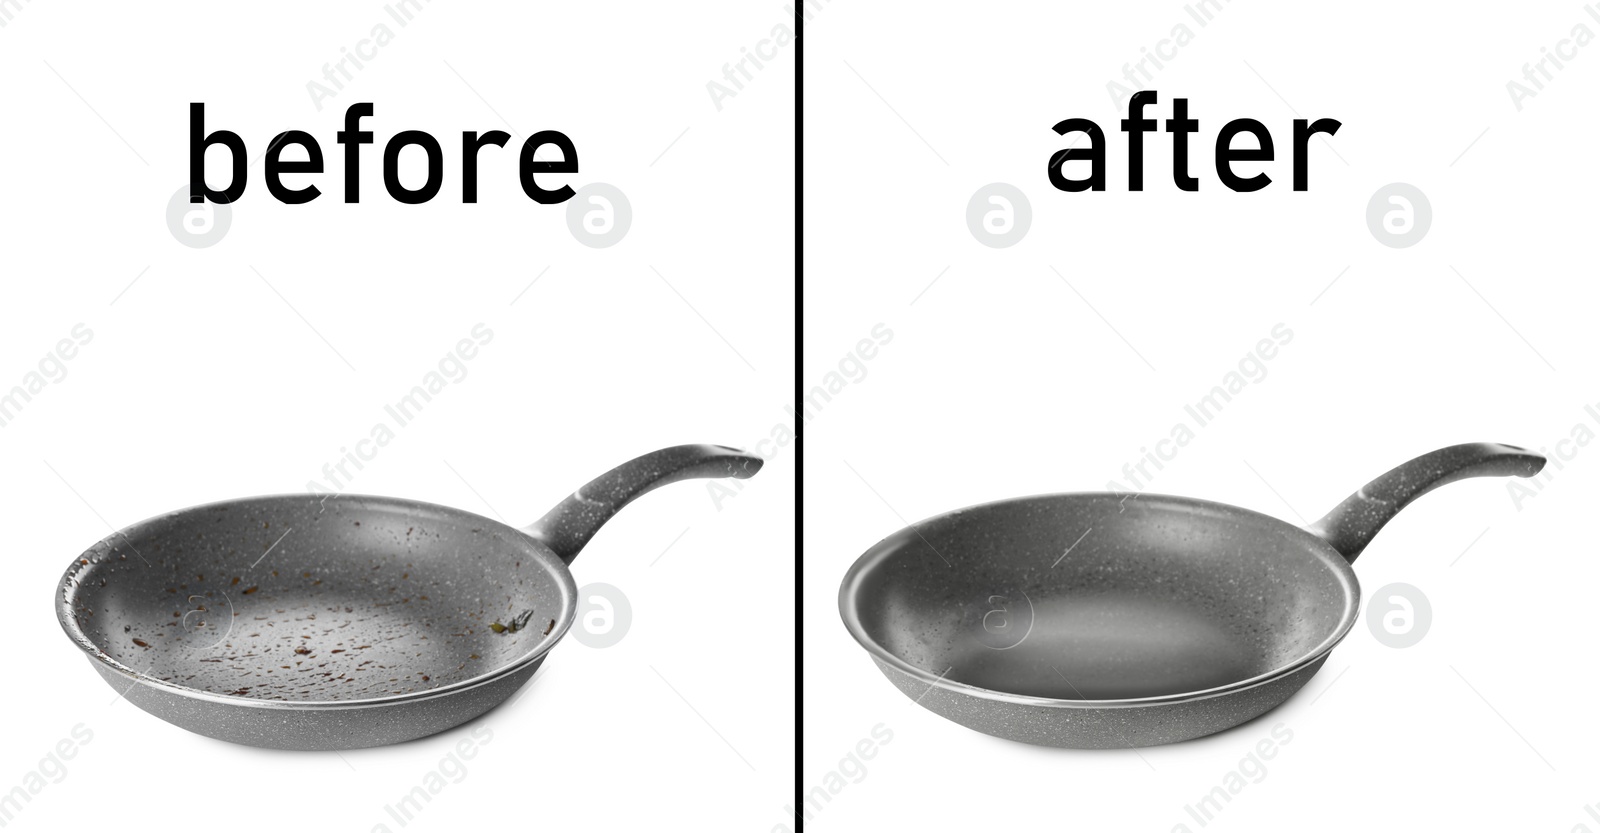 Image of Frying pan before and after cleaning on white background, collage